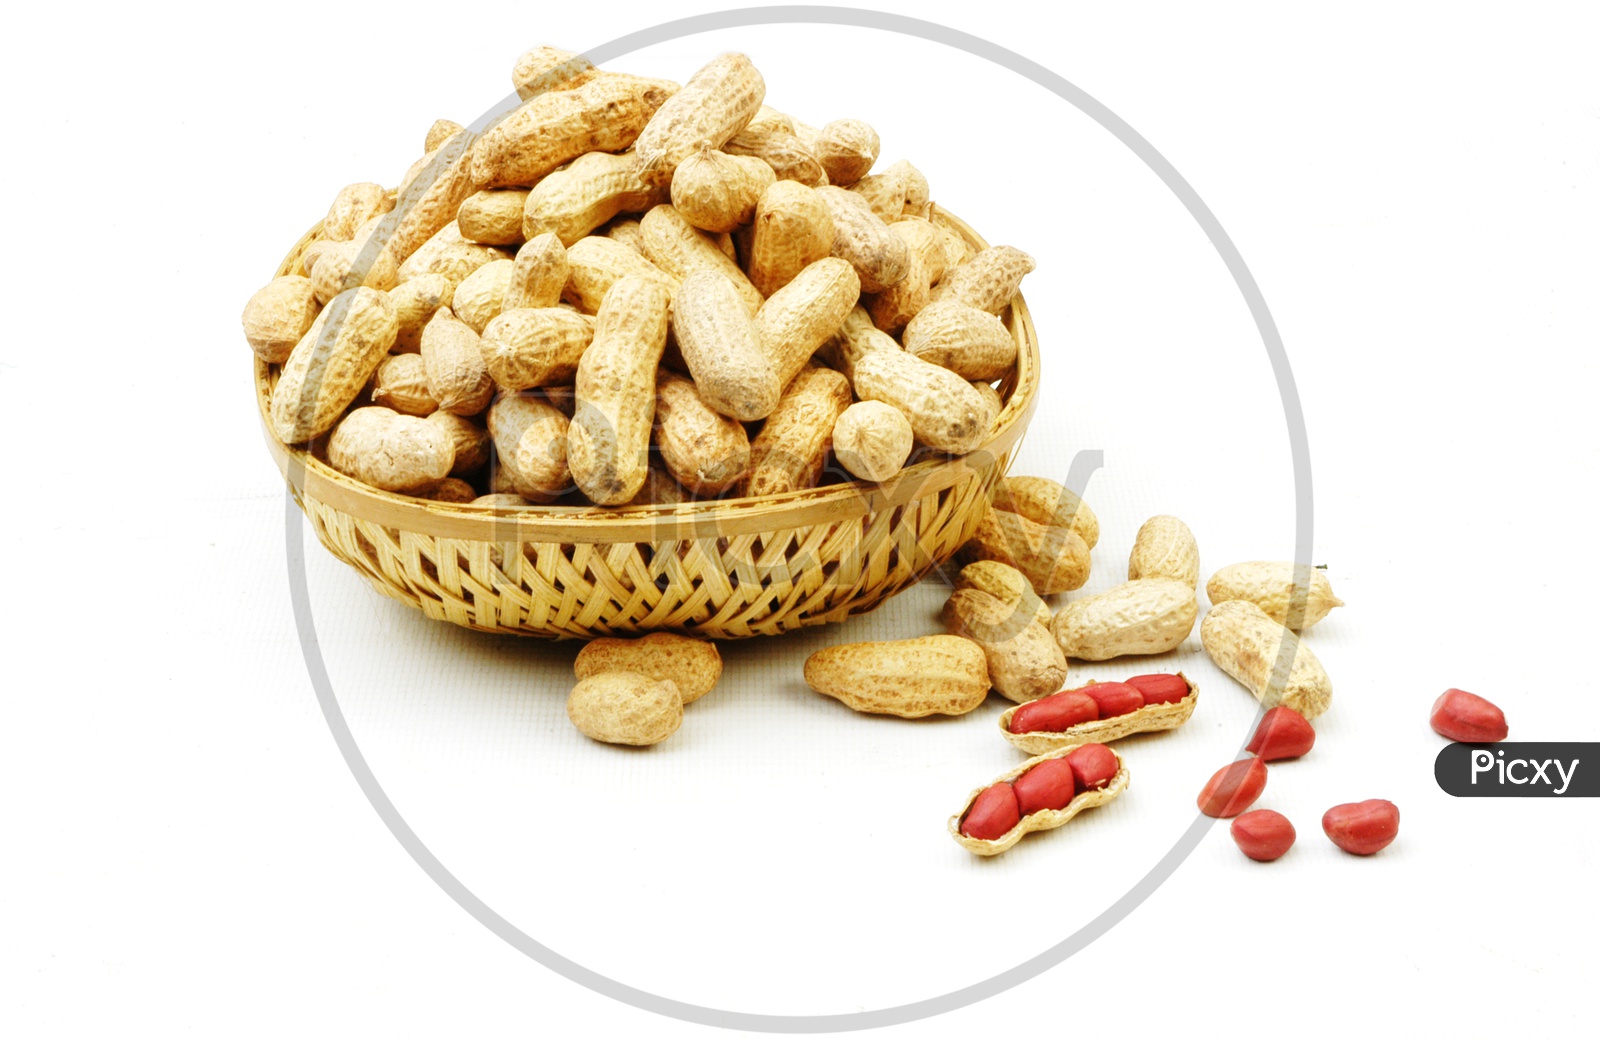 Whole Groundnuts in pods